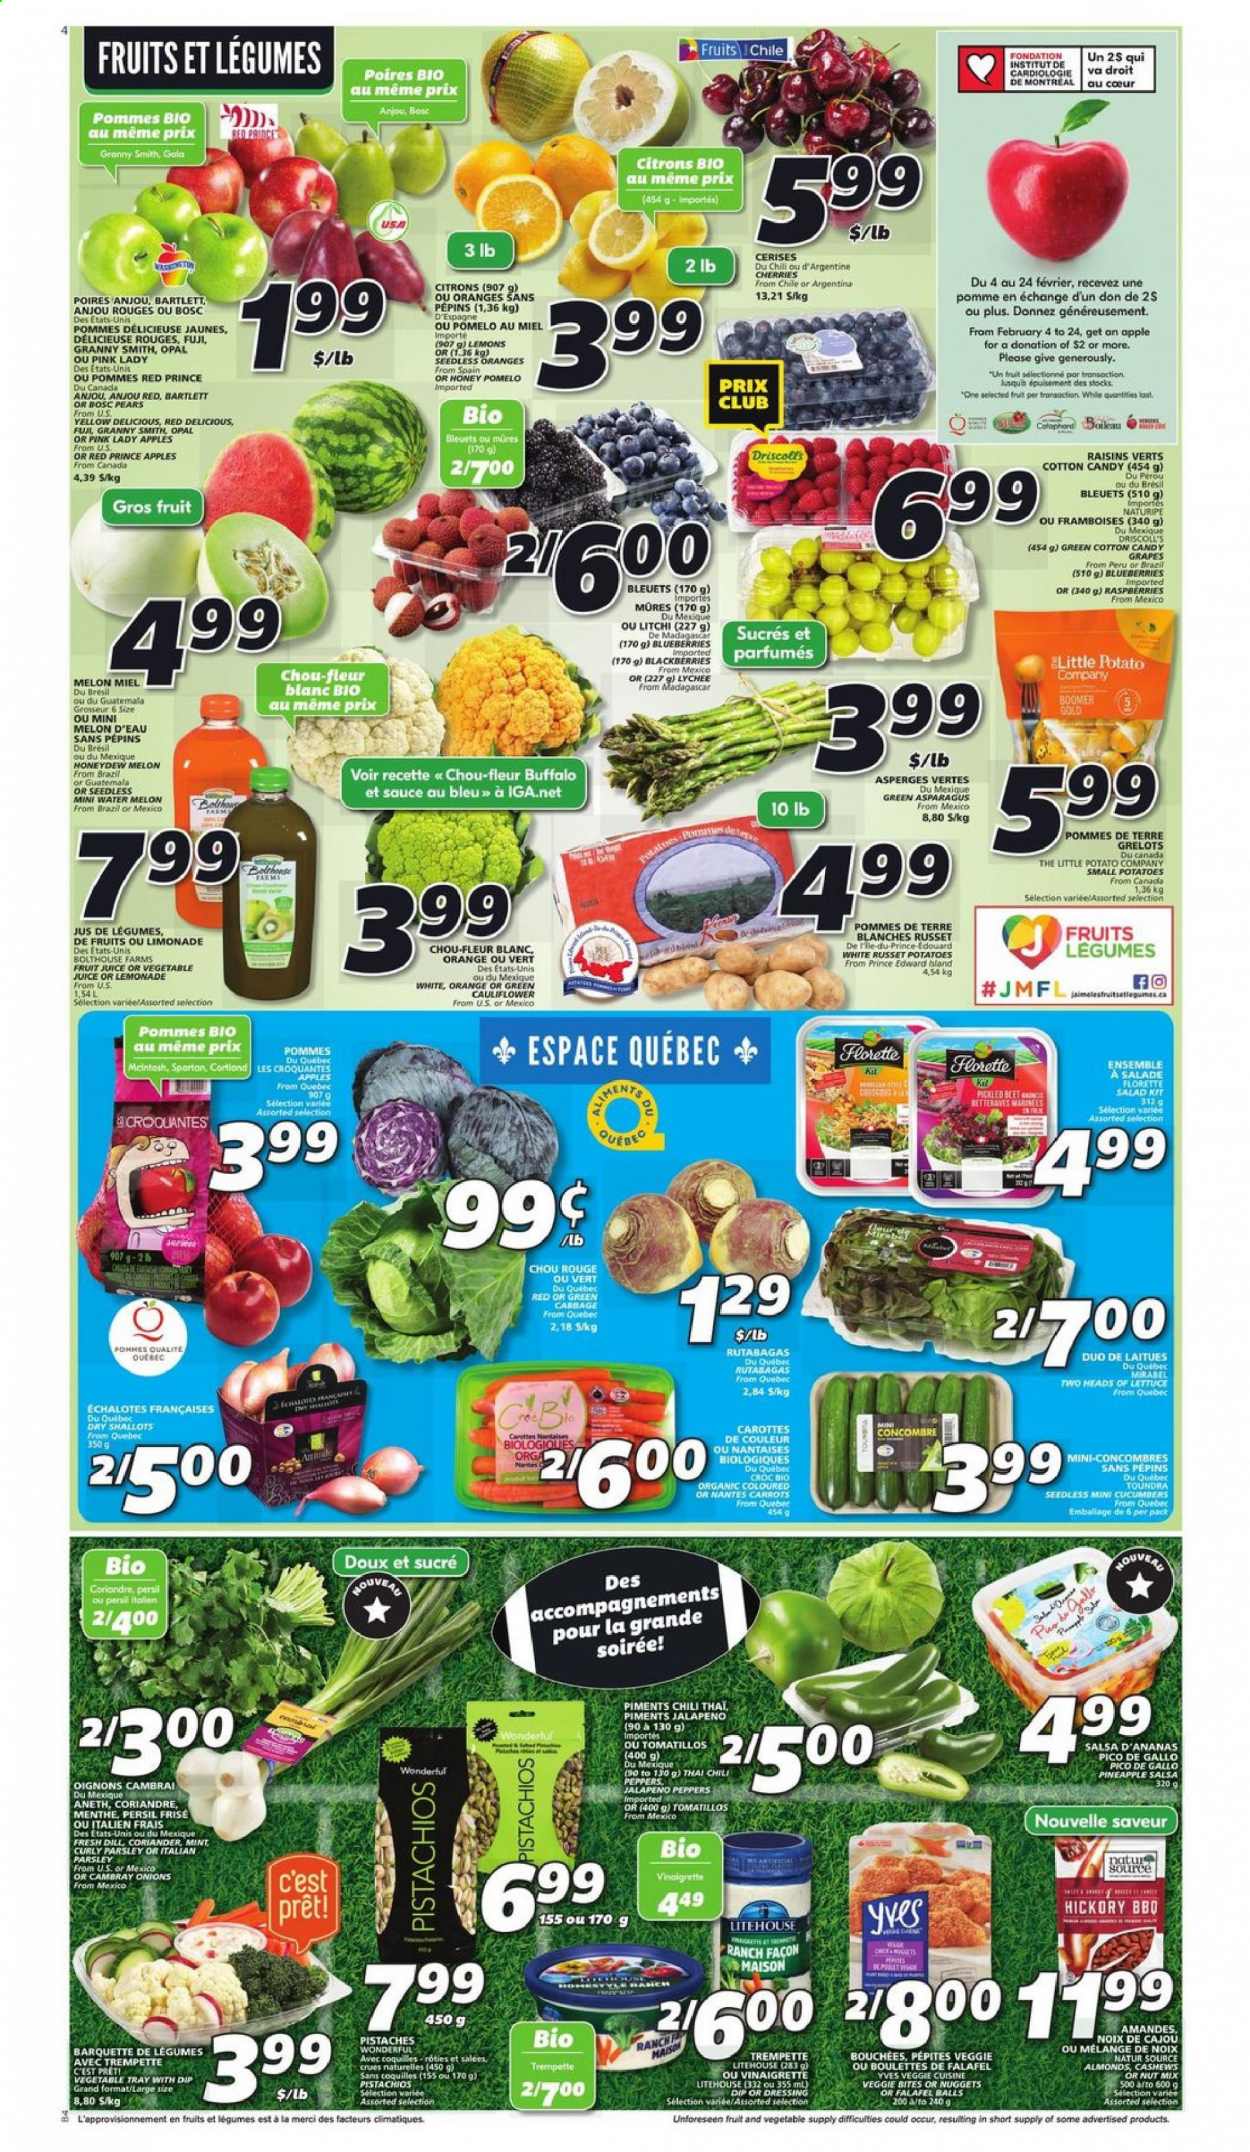 thumbnail - IGA Flyer - February 04, 2021 - February 10, 2021 - Sales products - cabbage, carrots, cucumber, russet potatoes, shallots, tomatillo, potatoes, parsley, onion, lettuce, salad, jalapeño, apples, blackberries, blueberries, Gala, grapes, lychee, Red Delicious apples, watermelon, honeydew, pineapple, pears, melons, lemons, pomelo, Granny Smith, Pink Lady, nuggets, sauce, dip, cotton candy, Merci, dill, coriander, vinaigrette dressing, dressing, salsa, almonds, cashews, dried fruit, pistachios, lemonade, juice, fruit juice, vegetable juice, raisins. Page 3.